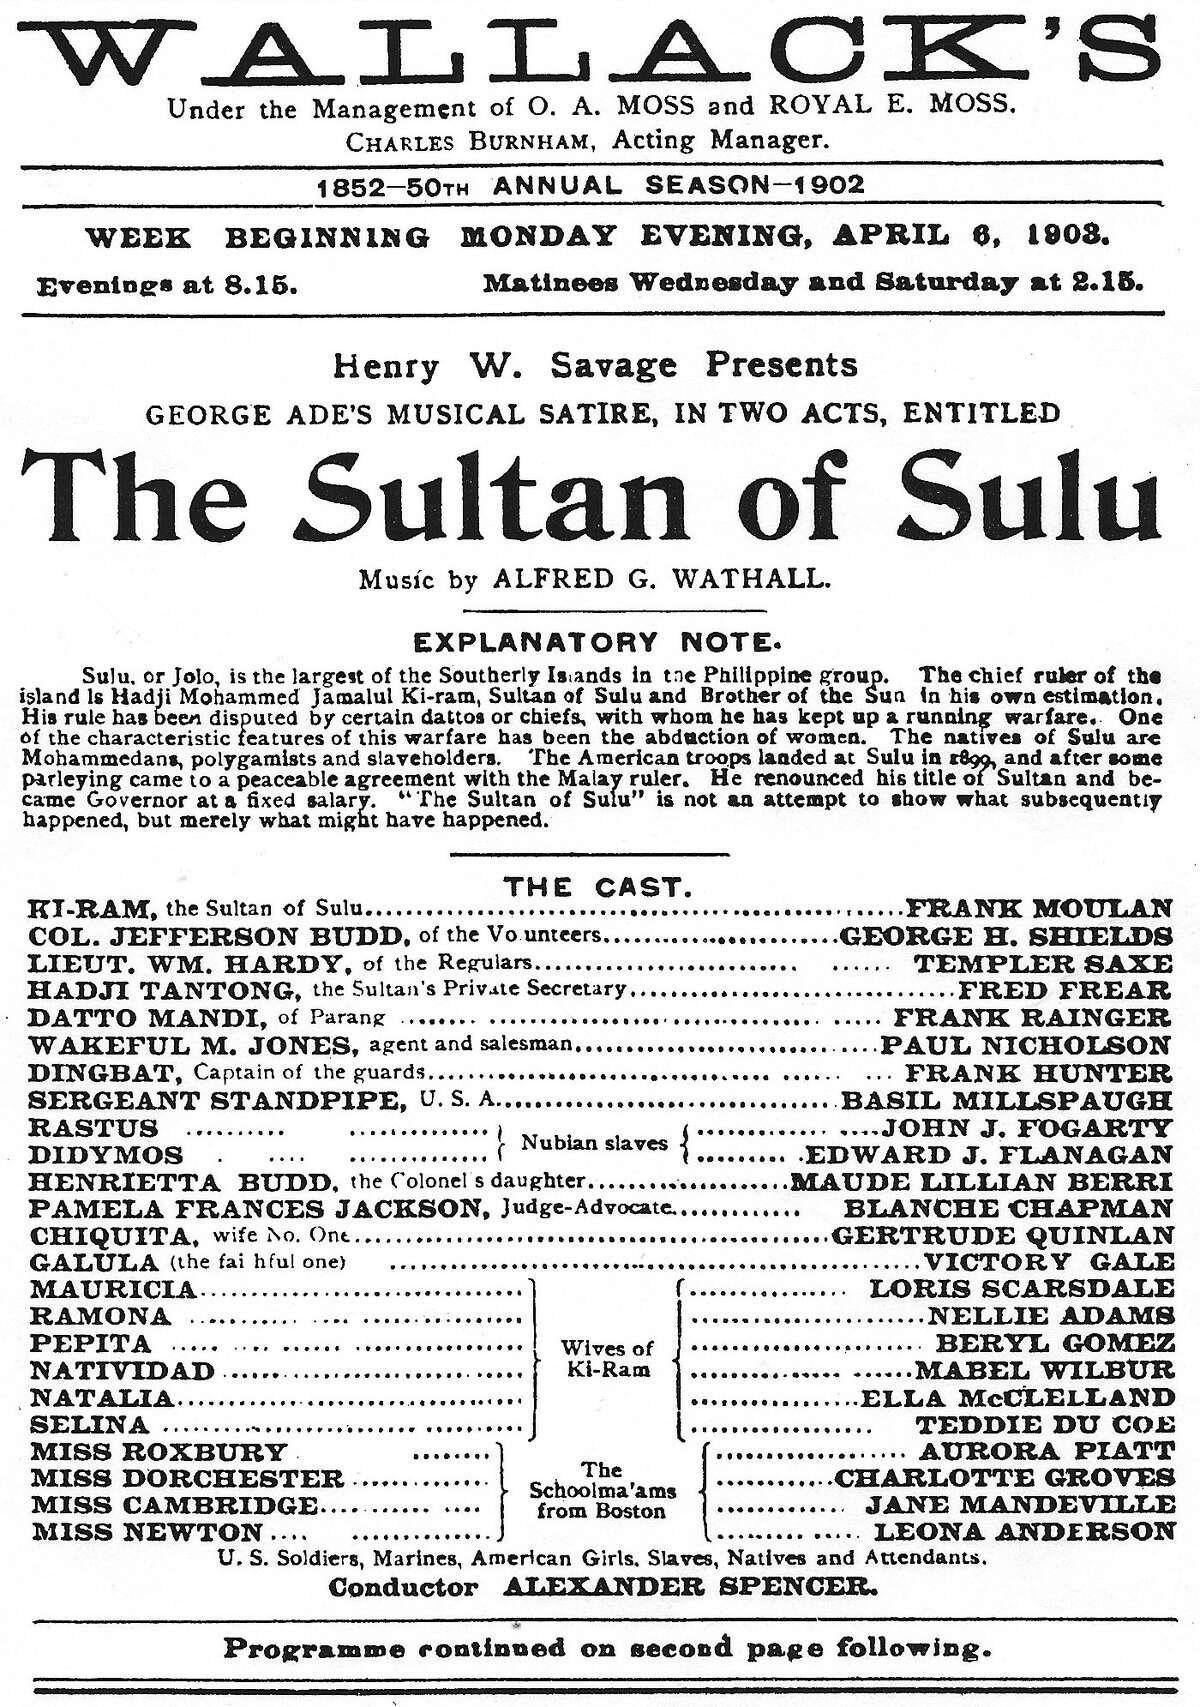 A playbill of “The Sultan of Sulu” when it was produced at Wallack’s Theatre on Broadway in April, 1903.